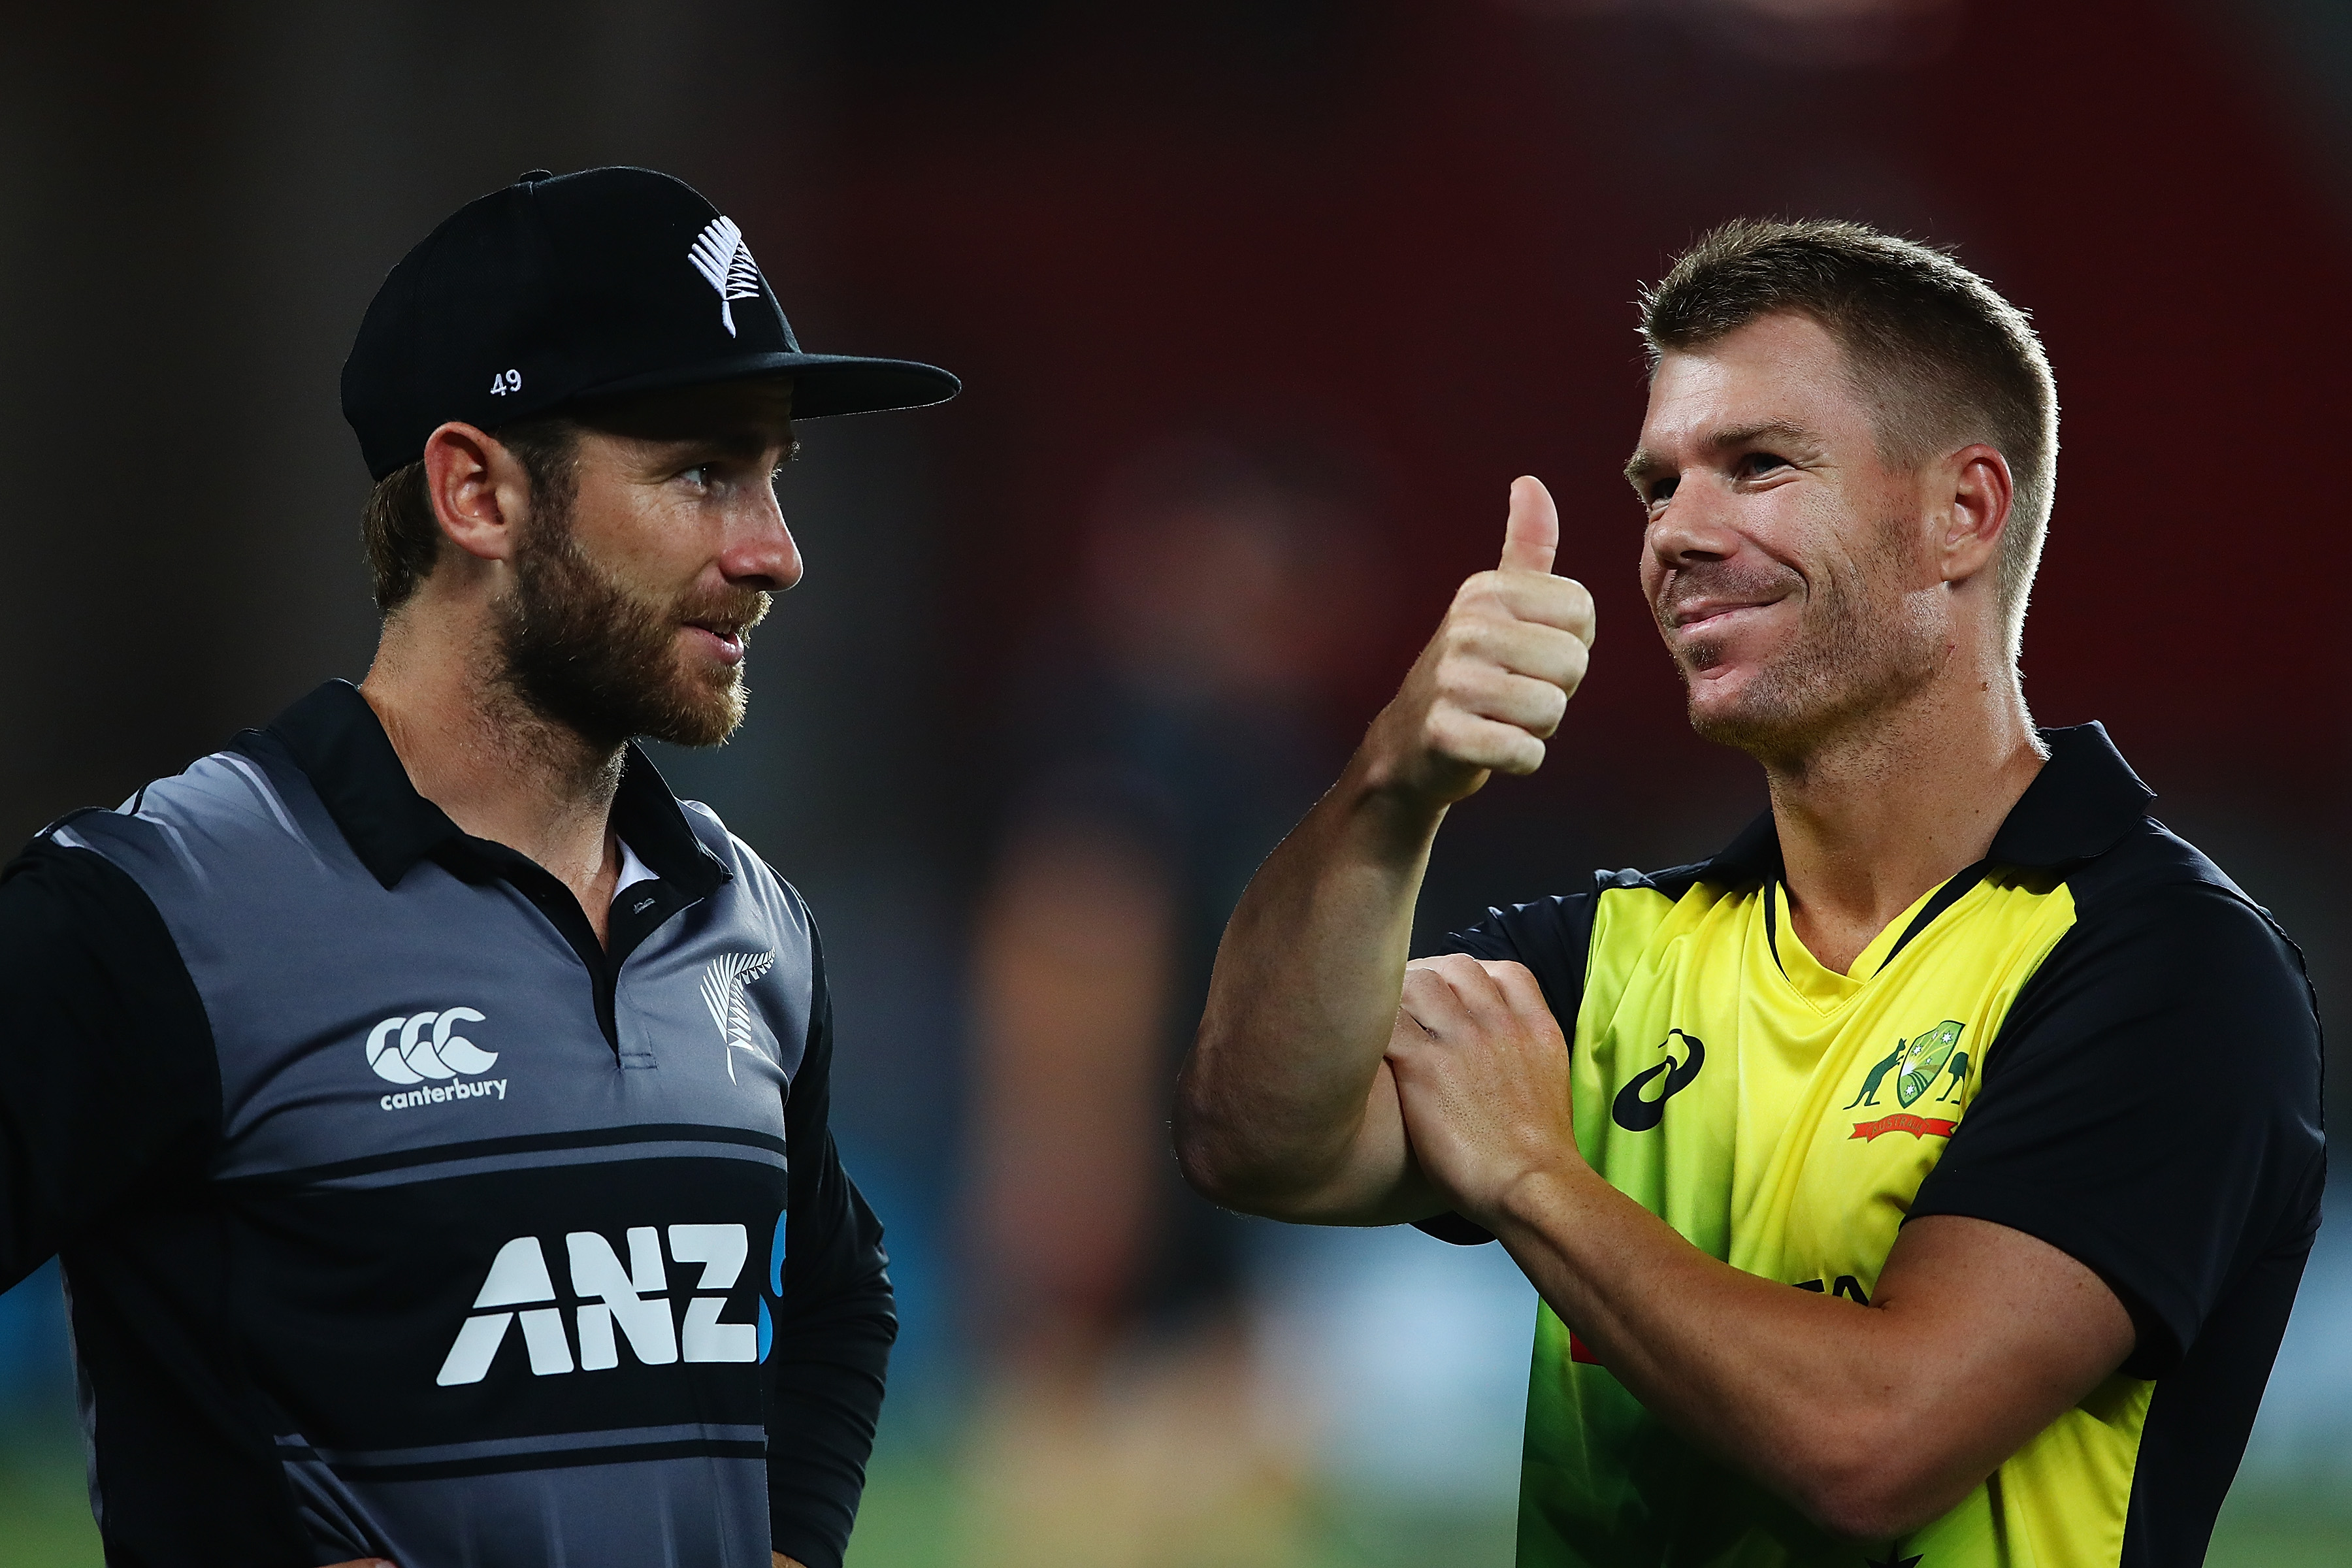 Remainder of AUS-NZ limited-overs series called-off amid COVID-19 scare